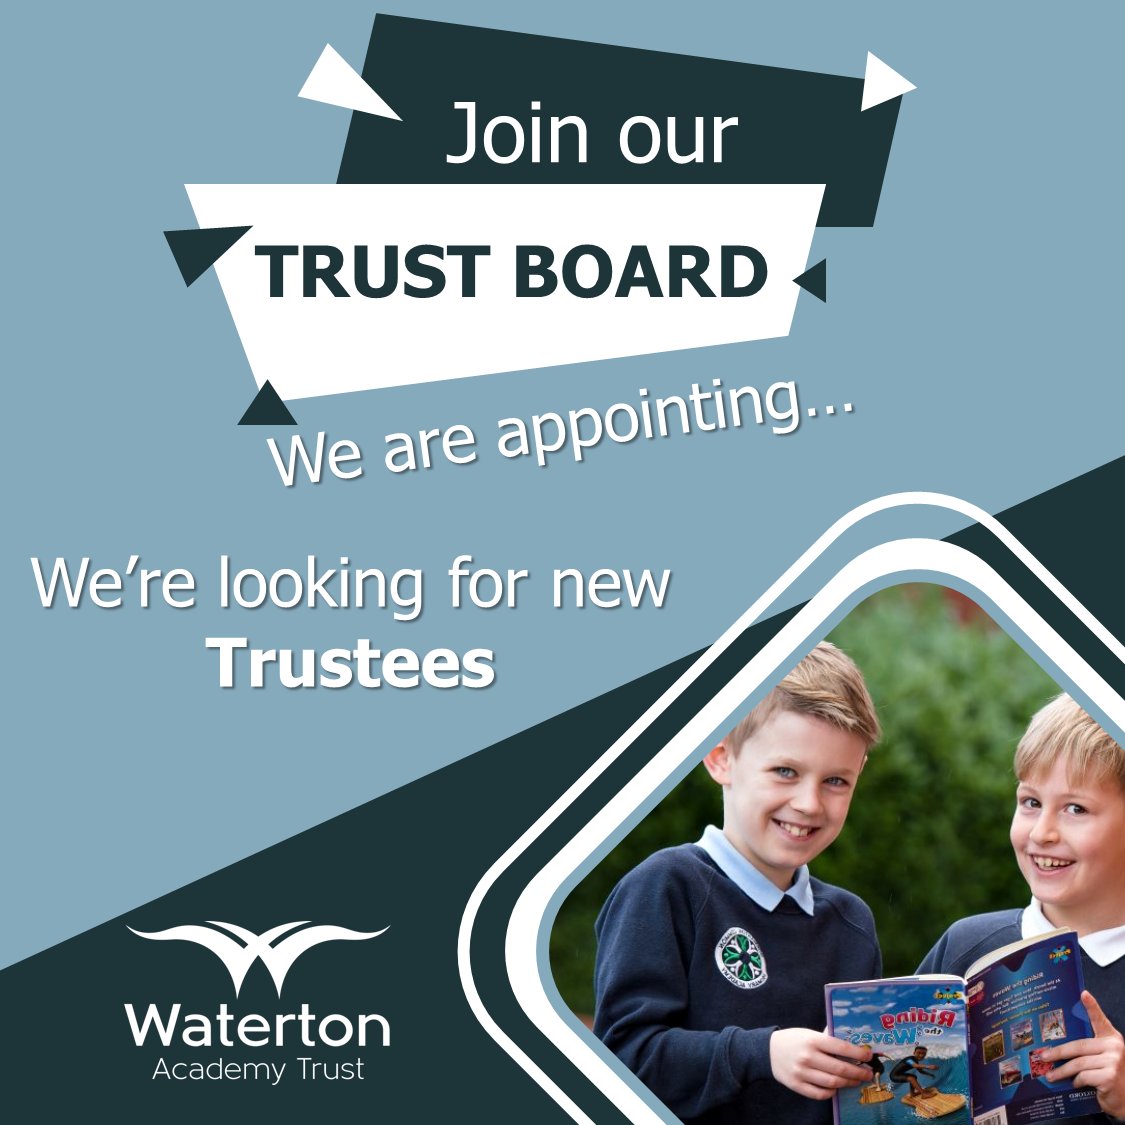 📋Waterton is looking to appoint new Trustee's to join our Trust Board. 💻Want to find out more? Please visit our site at: watertonacademytrust.org/governance-info 🔗Interested in applying? Apply Here: forms.office.com/e/fYYCwkwqgz #SchoolGovernance